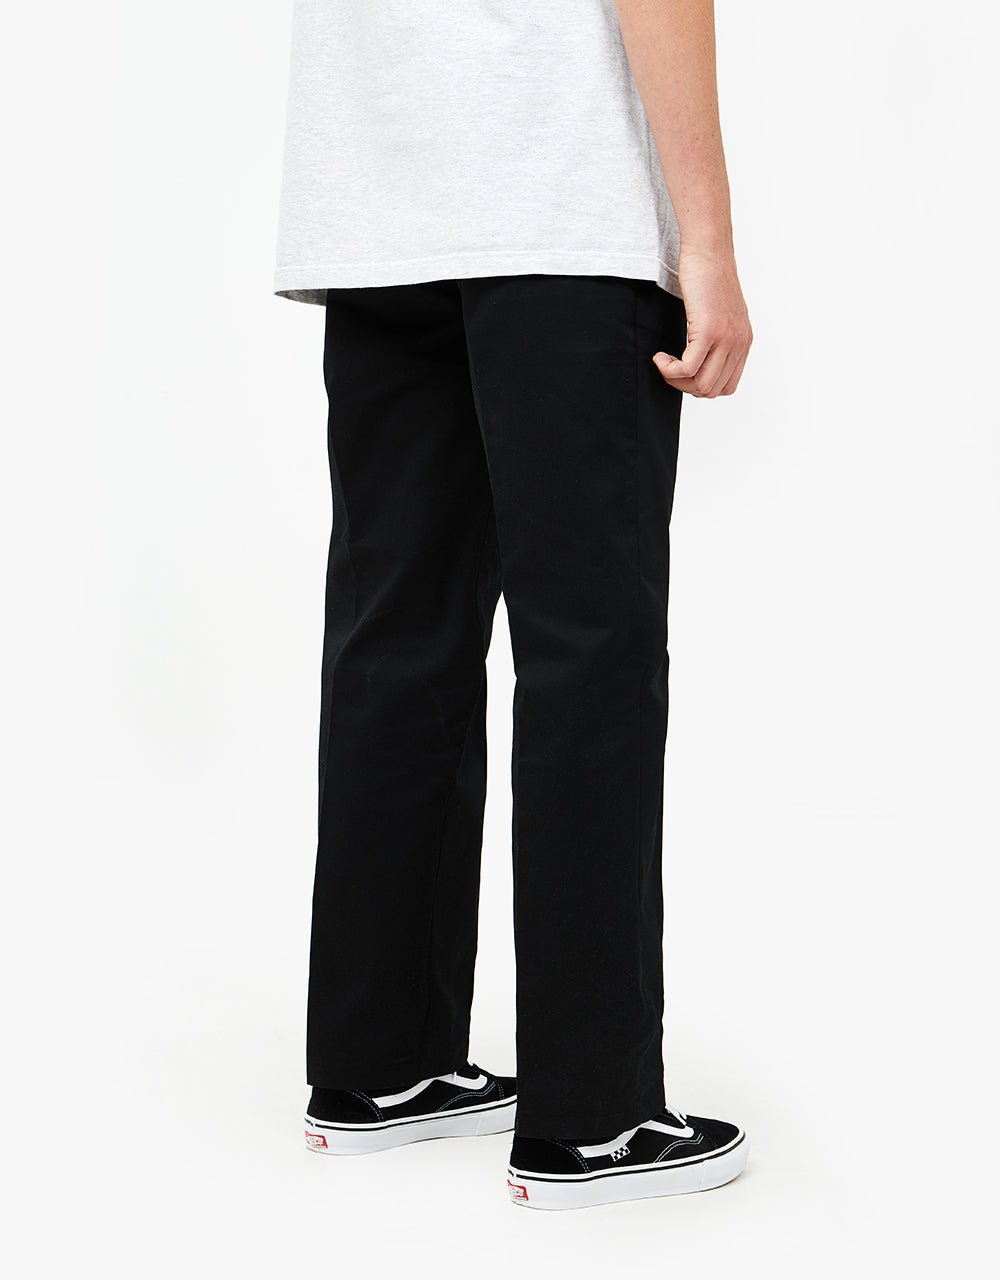 Route One Workpant - Black